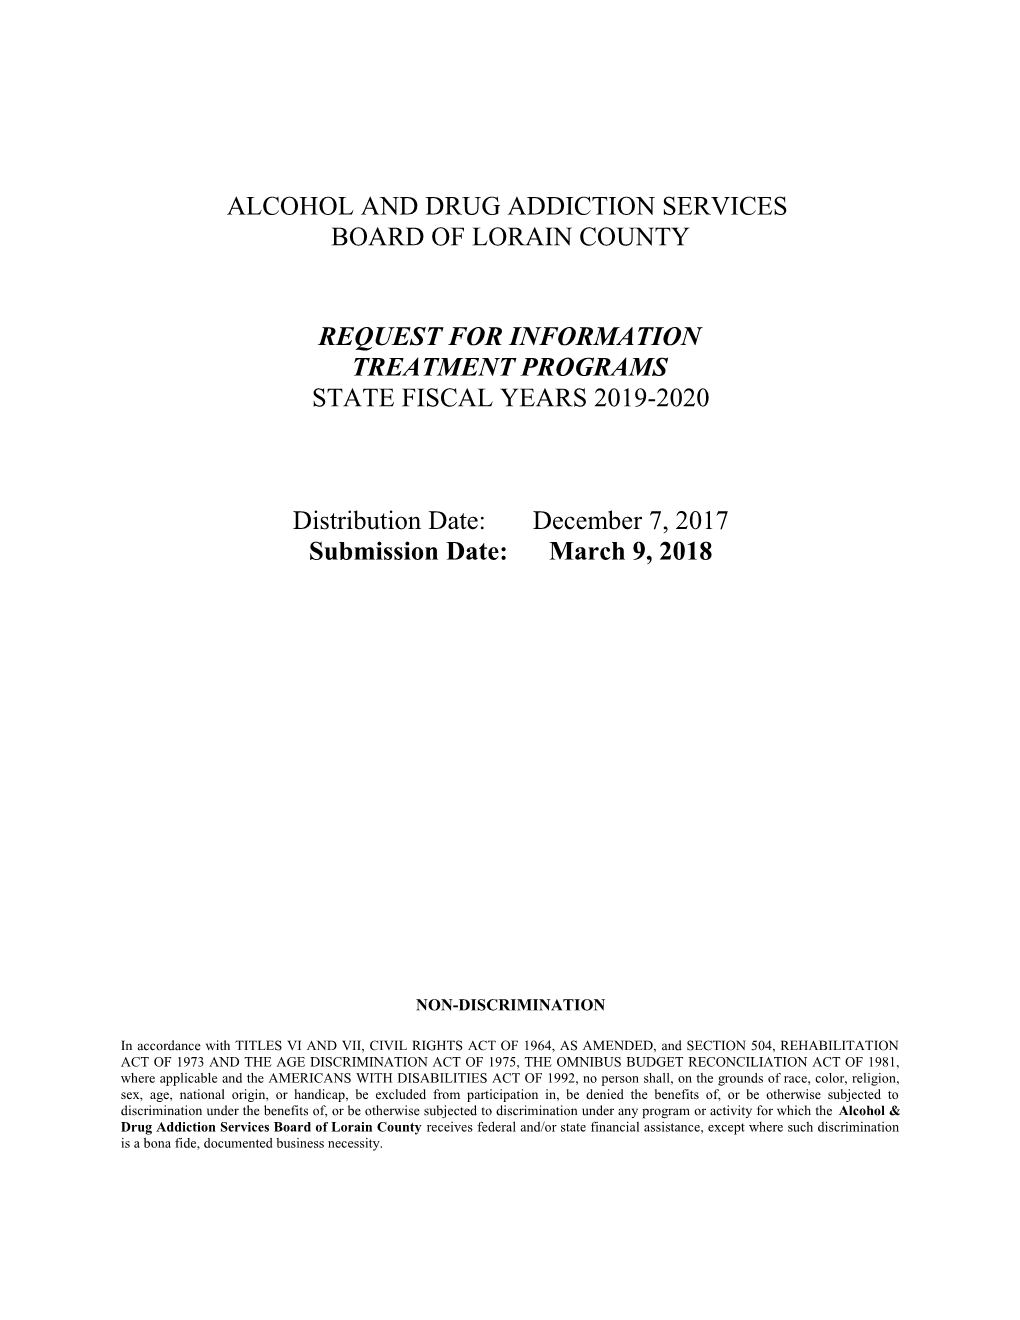 Alcohol and Drug Addiction Services